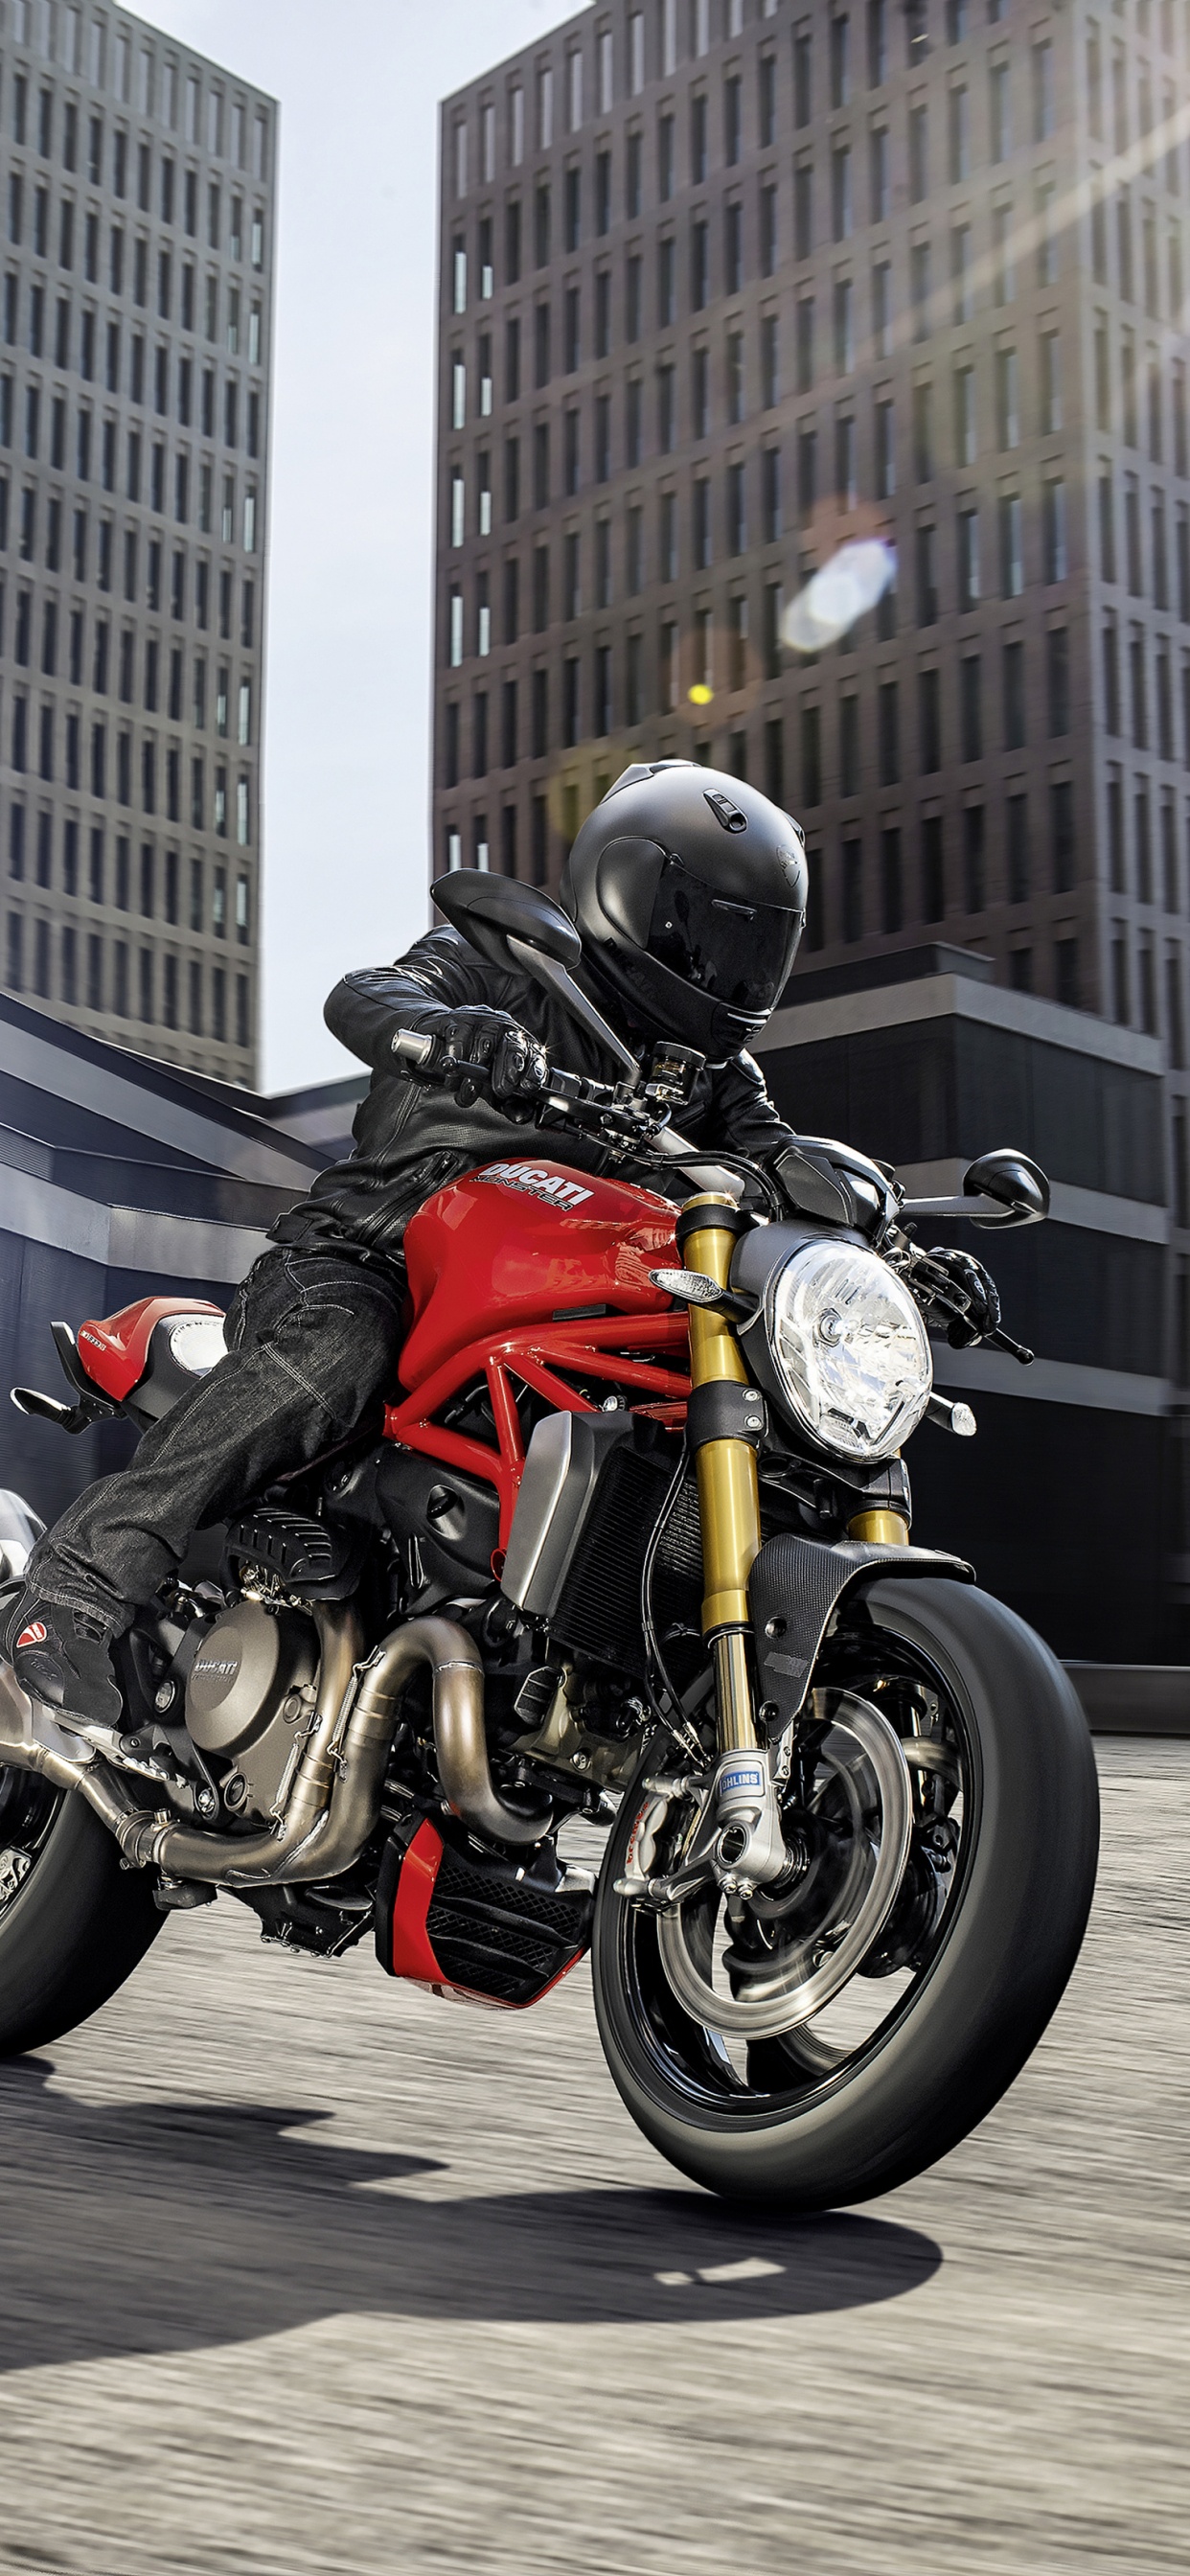 Black and Red Naked Motorcycle. Wallpaper in 1242x2688 Resolution